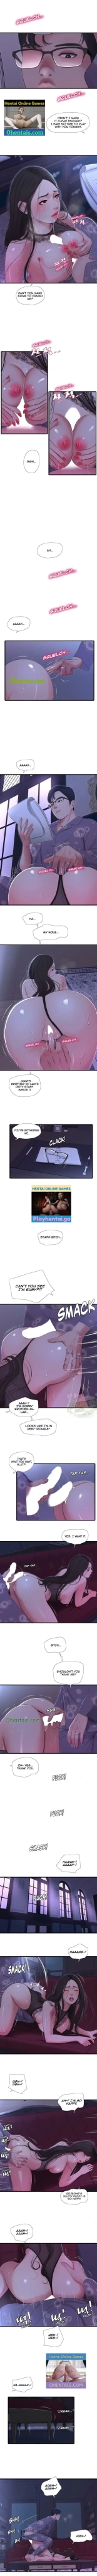 One's In-Laws Virgins Ch. 19-20 : page 10